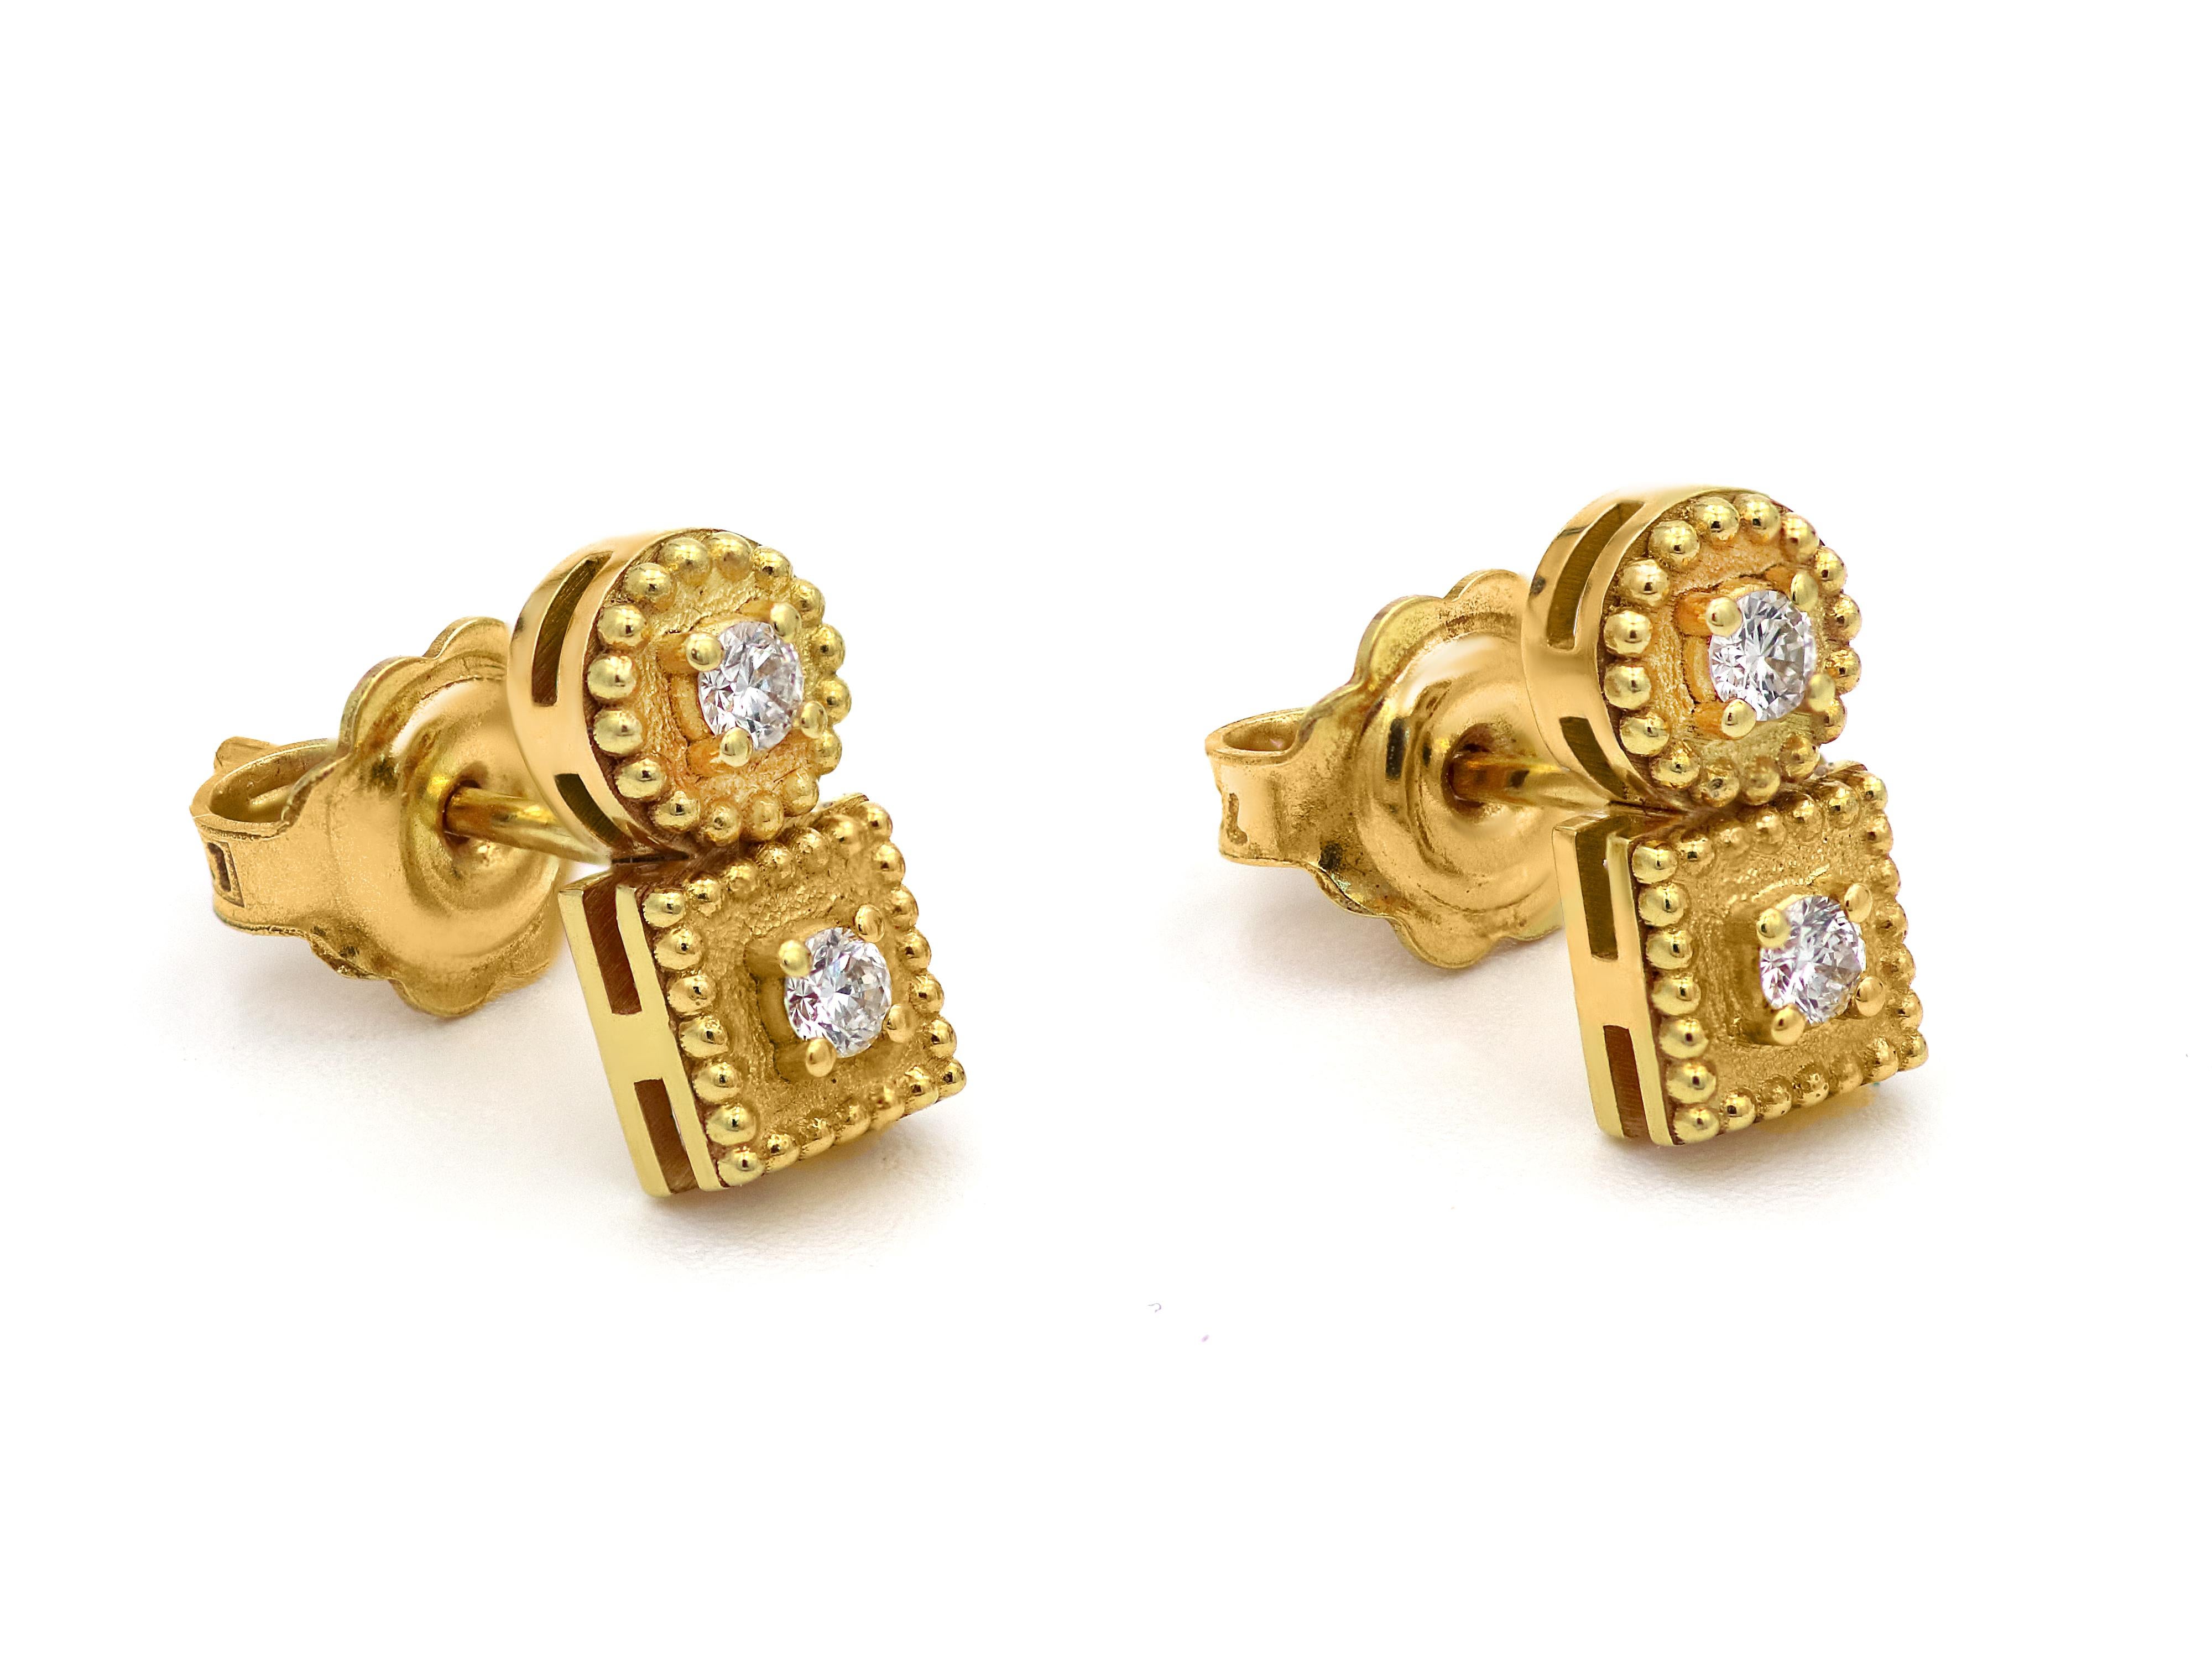 18k gold Balance earrings. The double balance stud that says is it all. Around in a square elements of neo classic aesthetics with granulation and set with very white brilliant diamonds to assure that even small can be powerful. The perfect daily